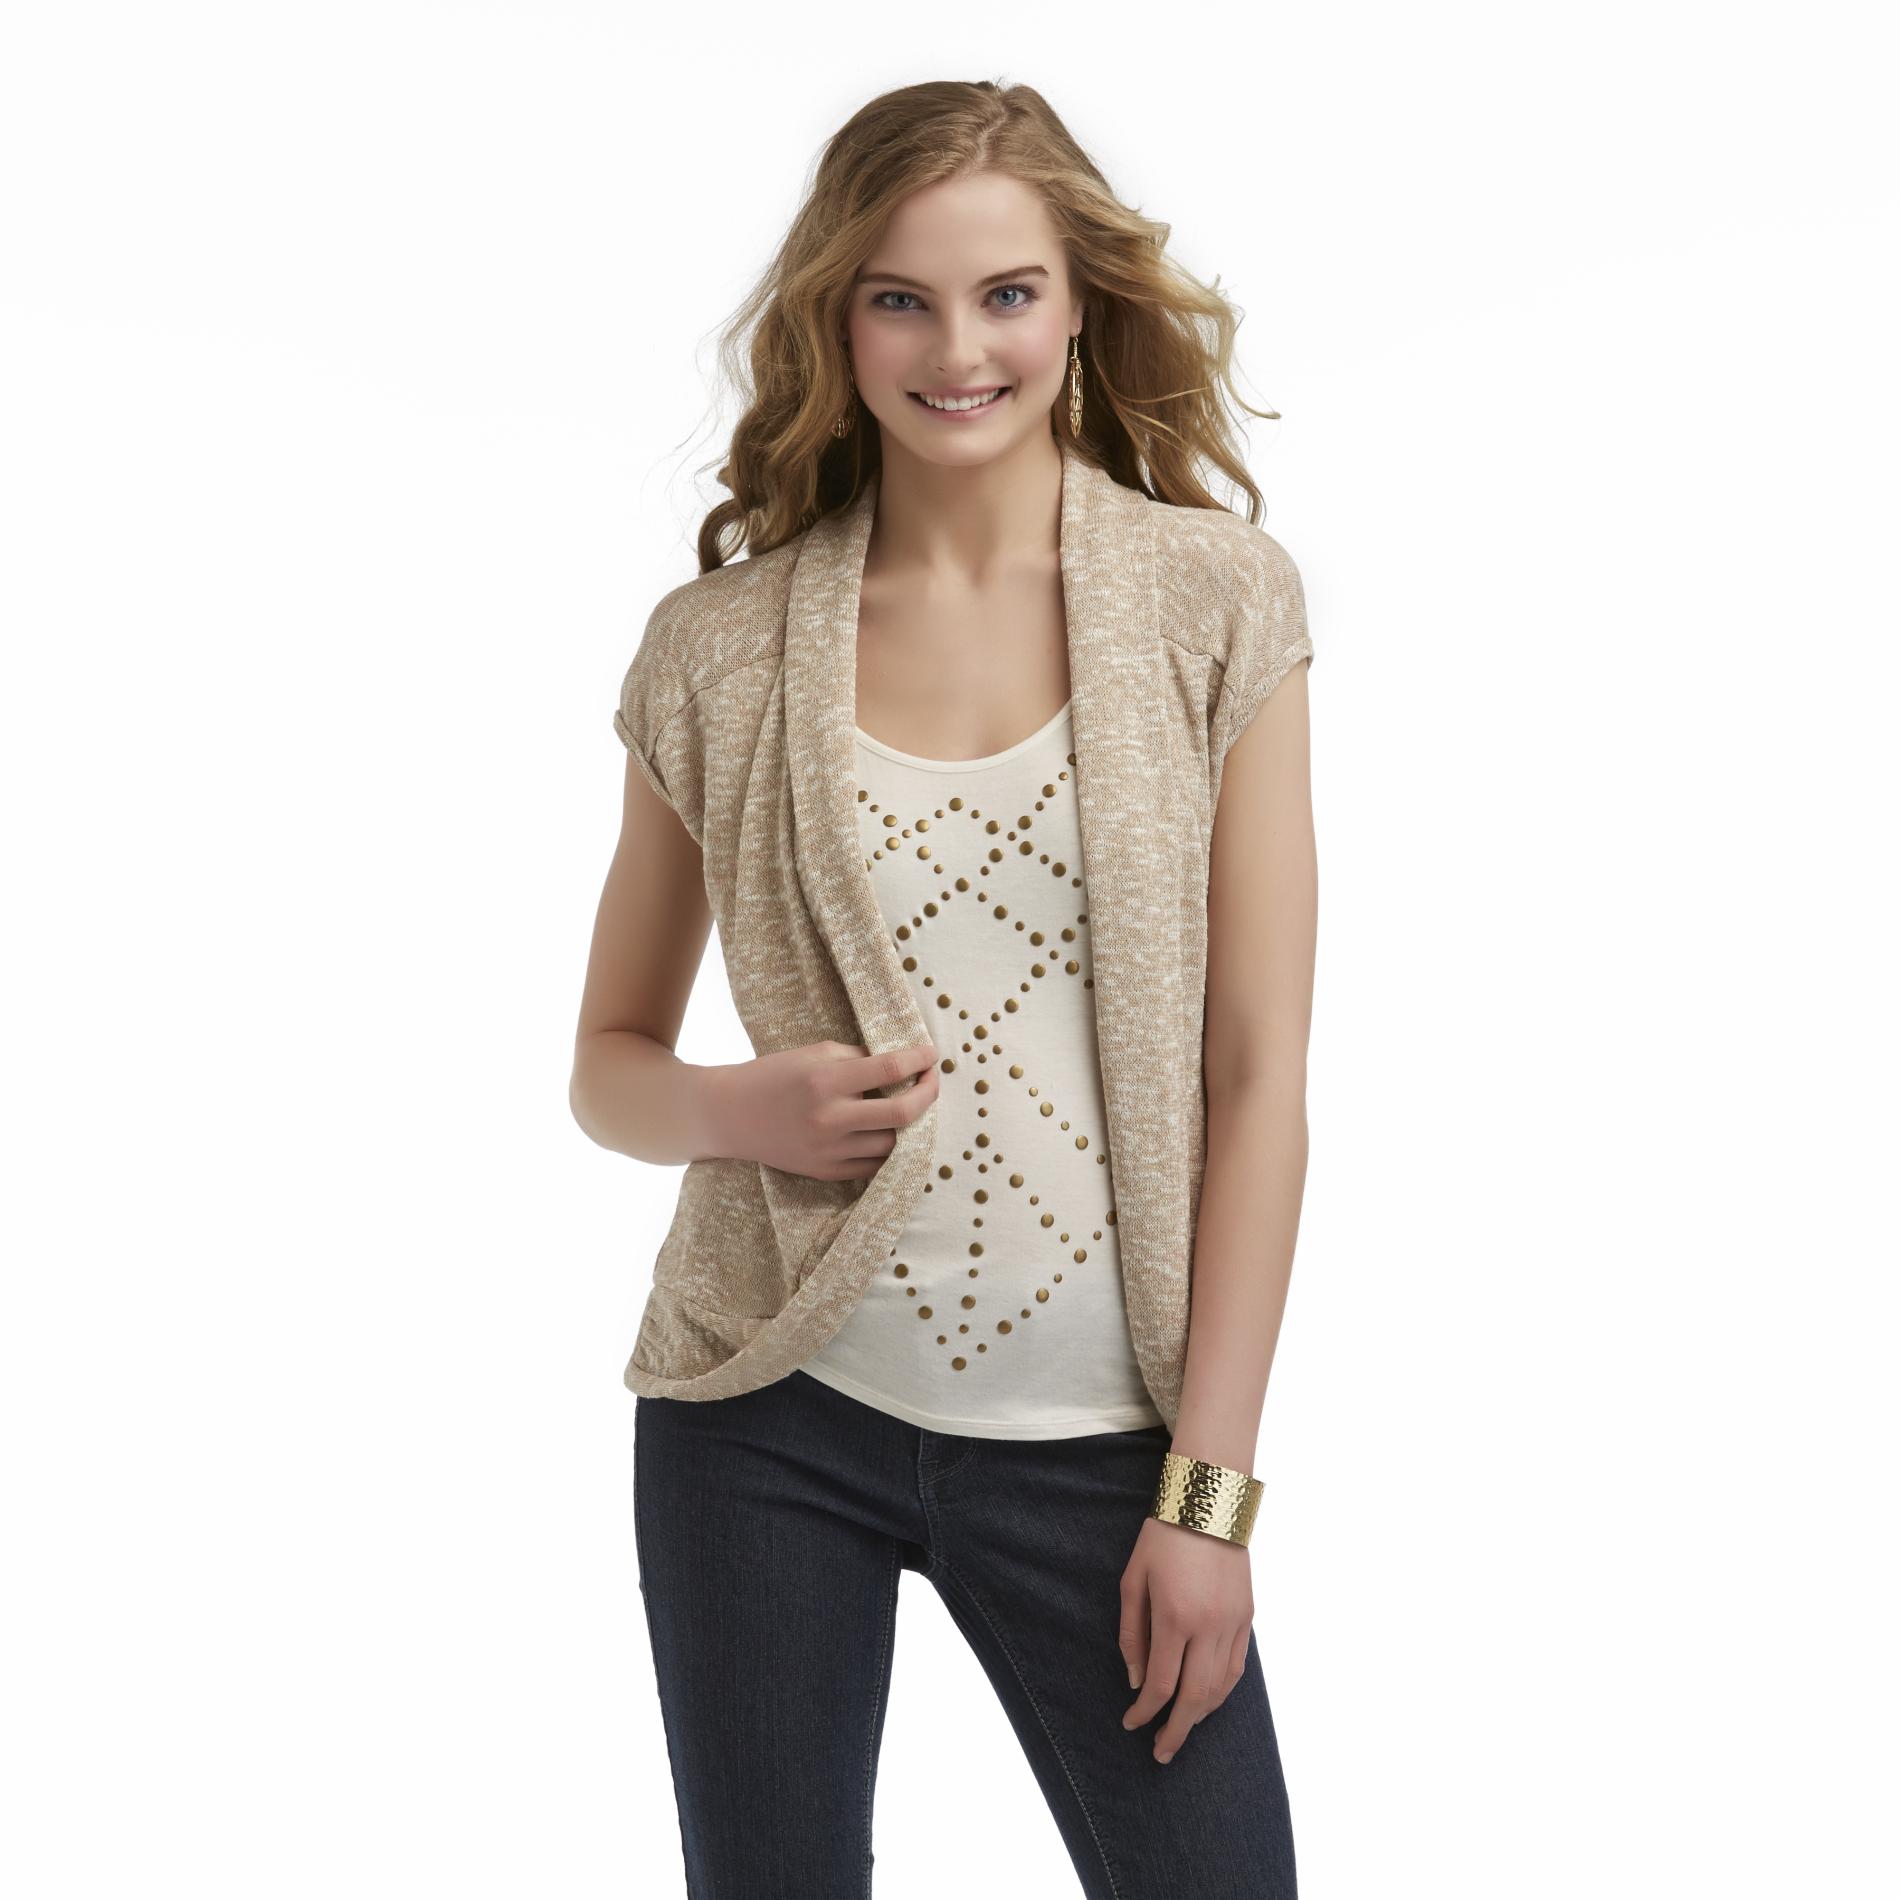 Heart Soul Junior's Layered Look Dolman Top - Studded